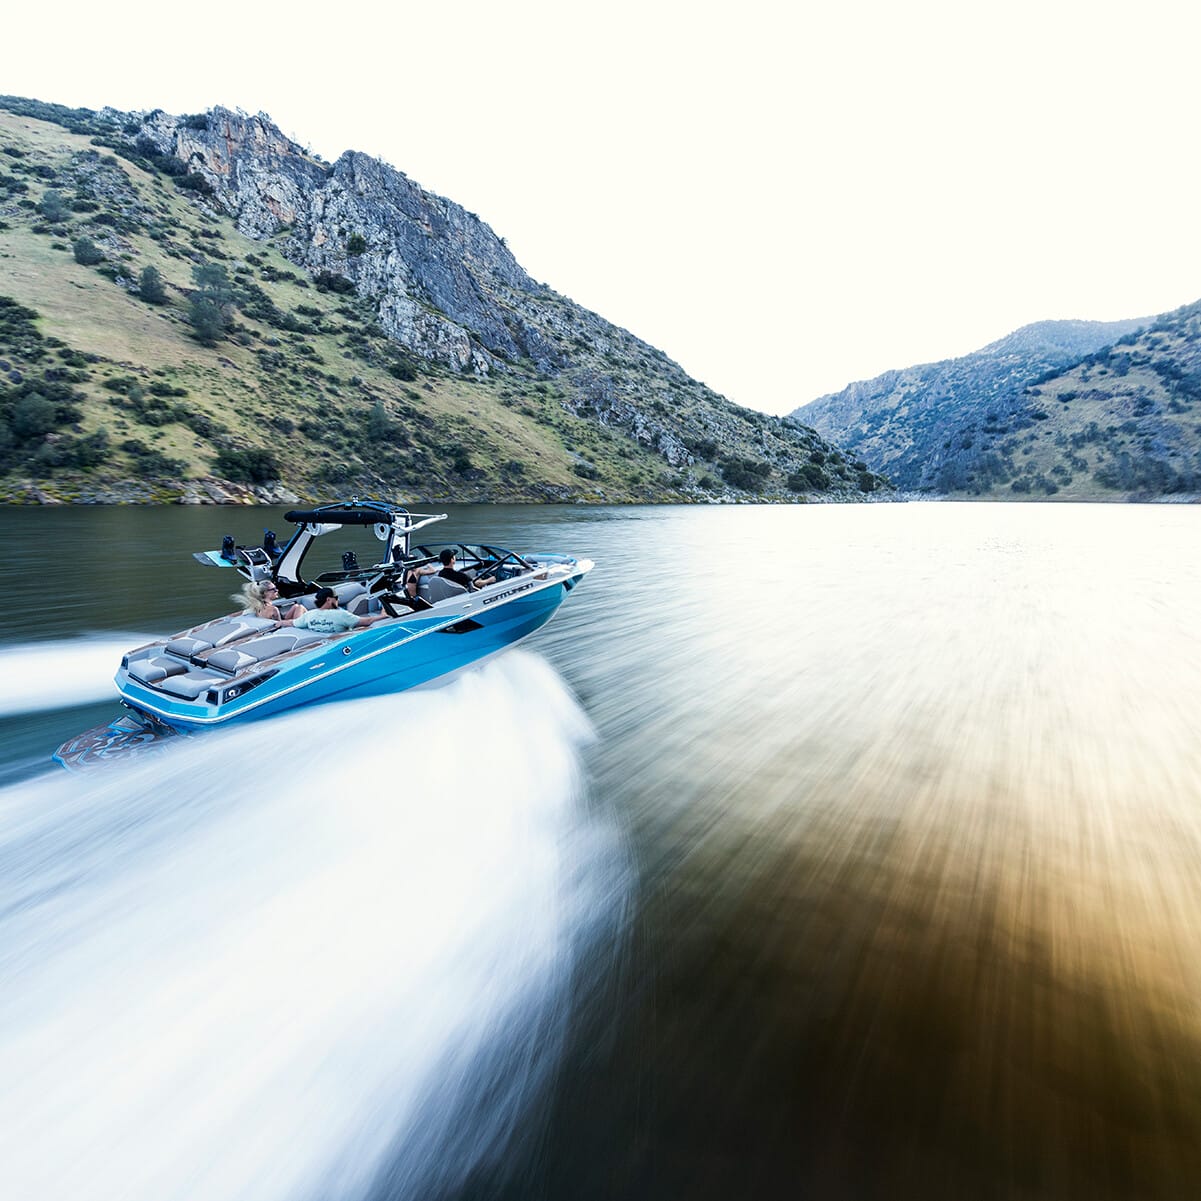 A Centurion Fe22 speedboat moves swiftly across a narrow river flanked by steep, green hills under a clear sky.